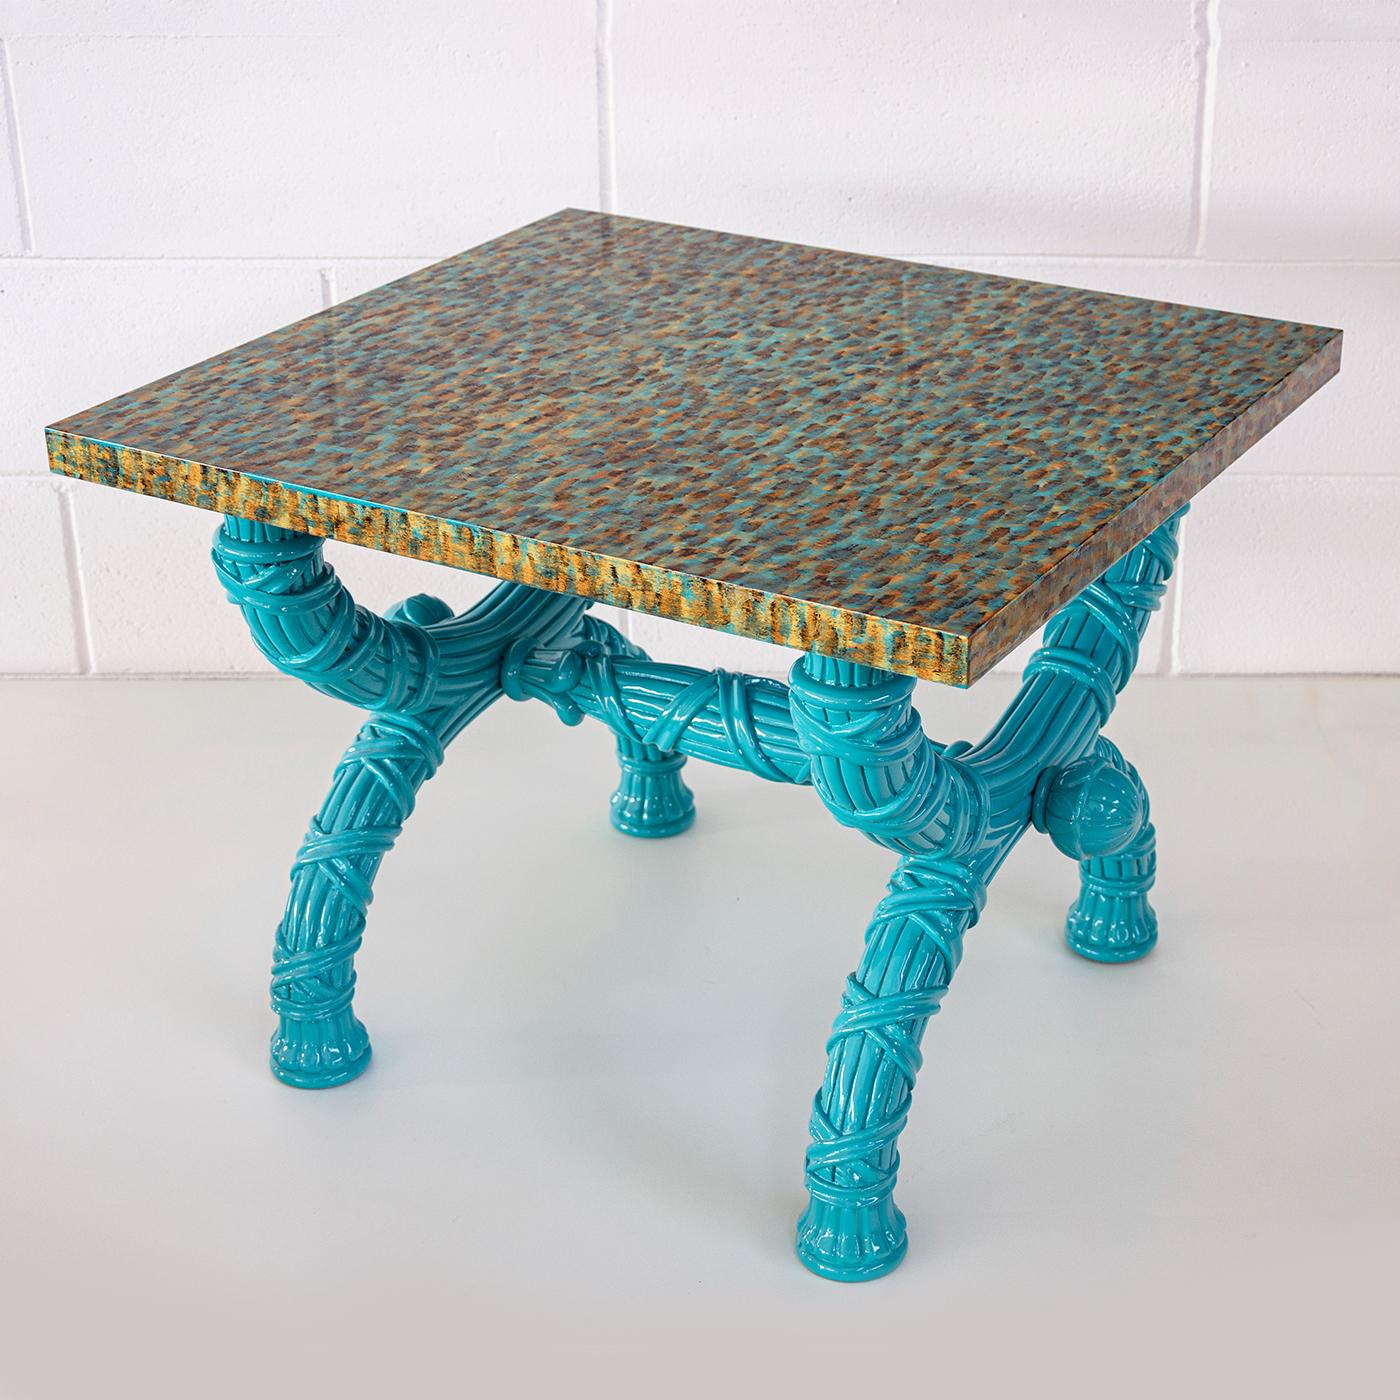 Side table with carved wood base, lacquered blue turquoise. The top is hand-painted wood with a high gloss finish. A touch of joyful colors to enlighten any living! This side table is a unique piece designed by G. Ventura.